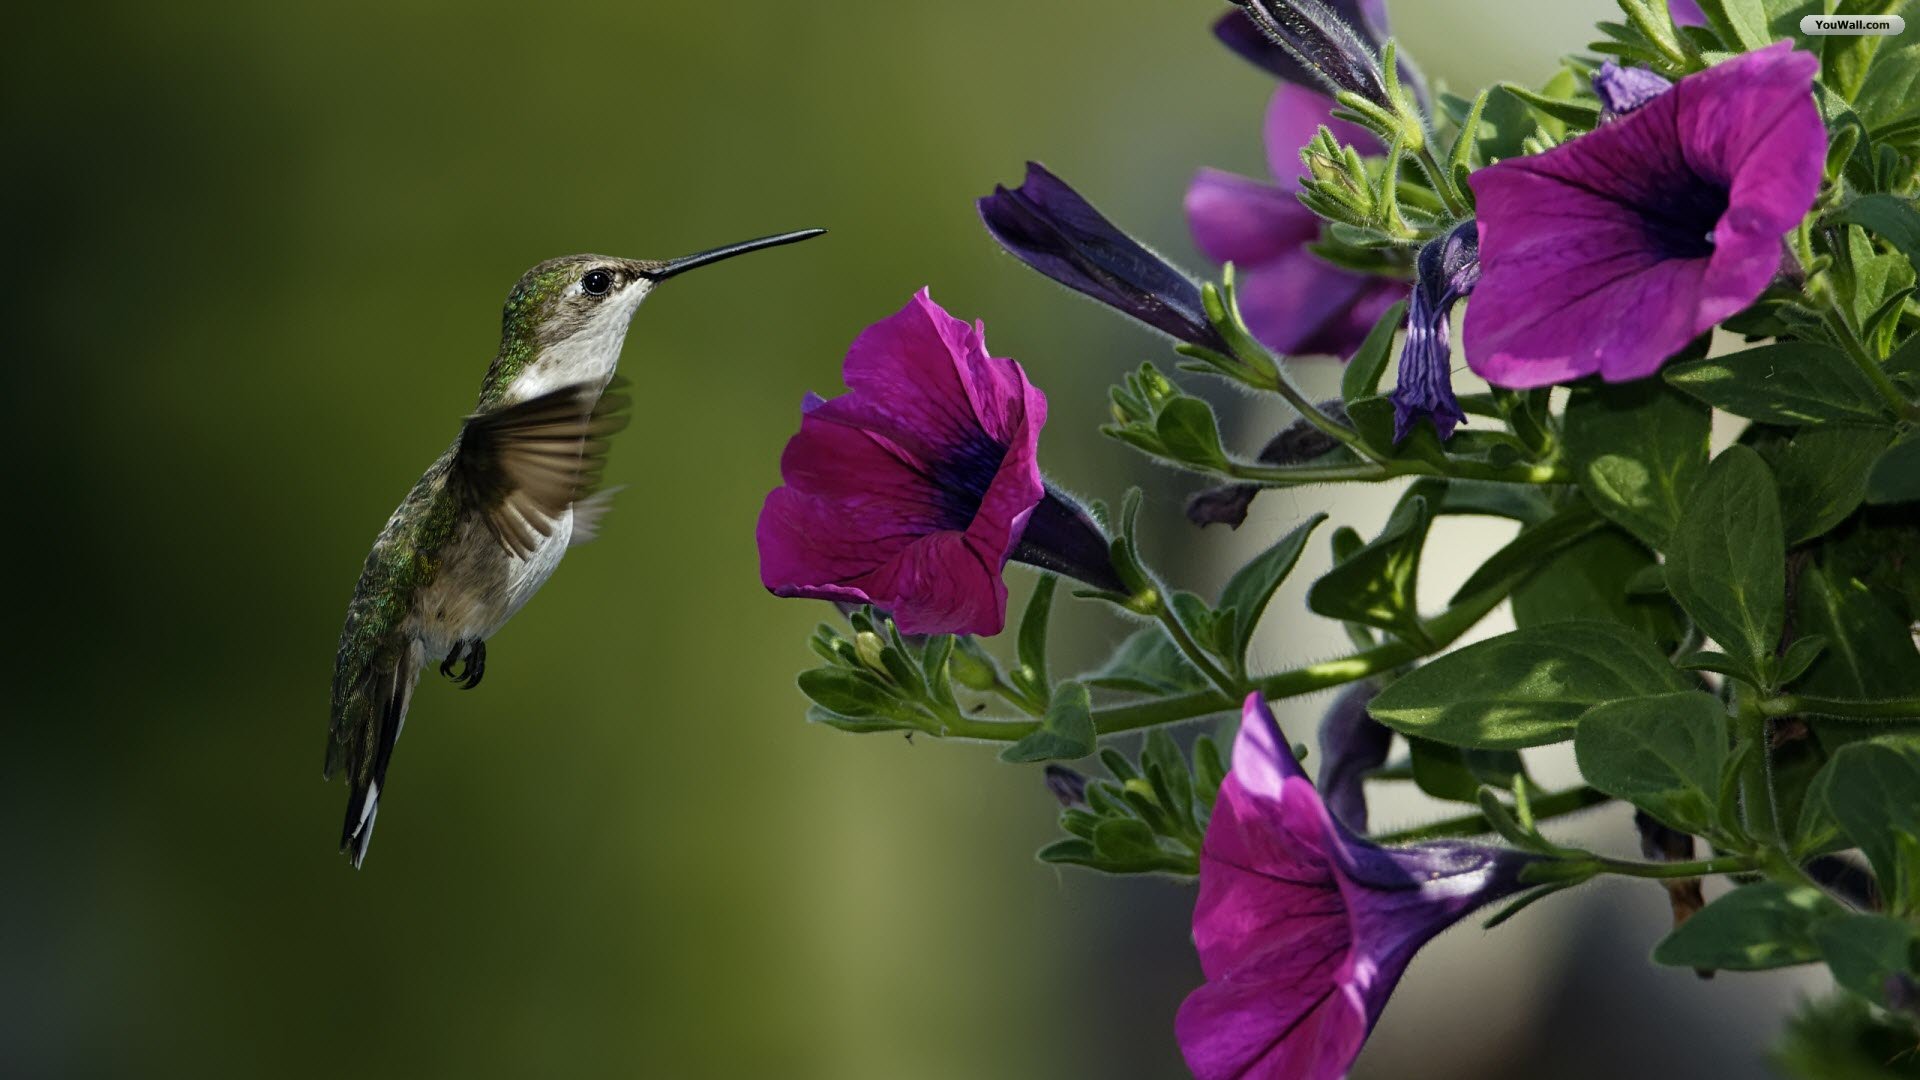 Download Image Free Images Birds Flowers Wallpaper 1920x1080 Full HD